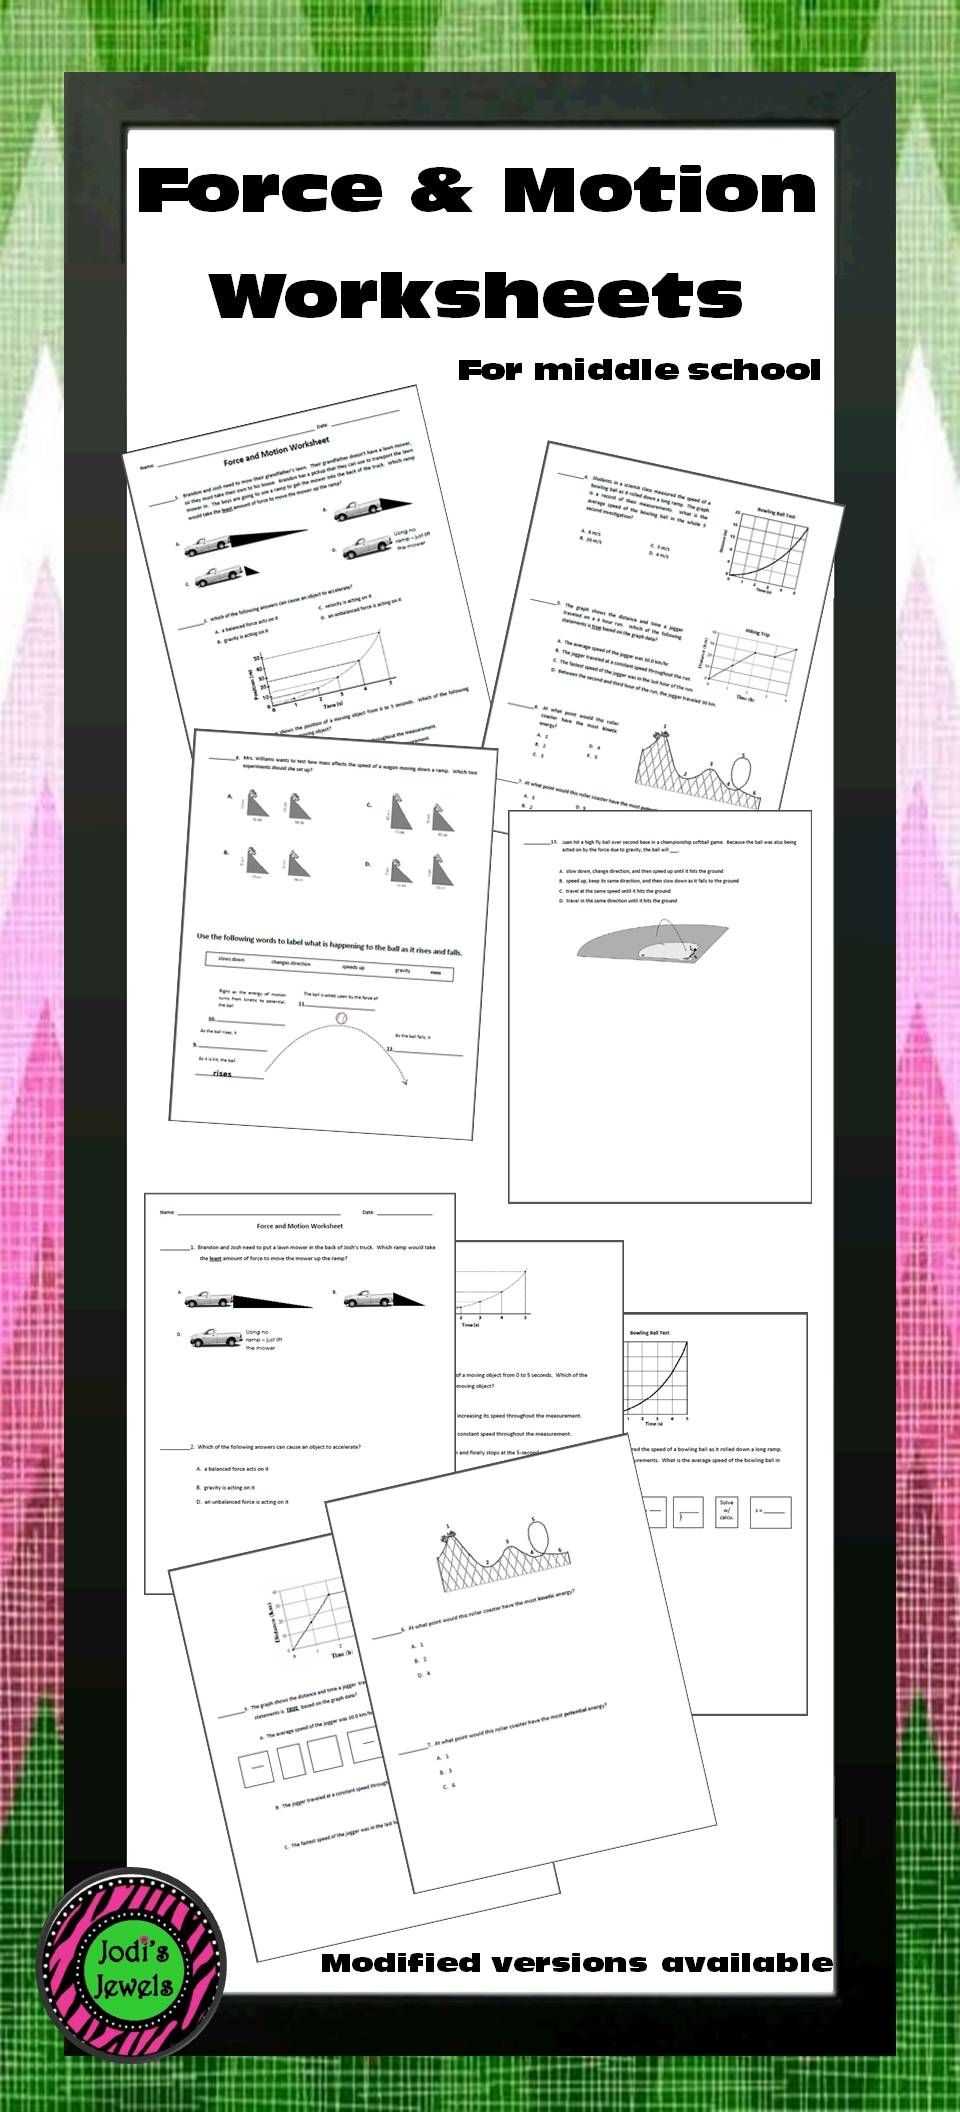 Forces Worksheet 1 Answer Key as Well as force and Motion Worksheet Pinterest